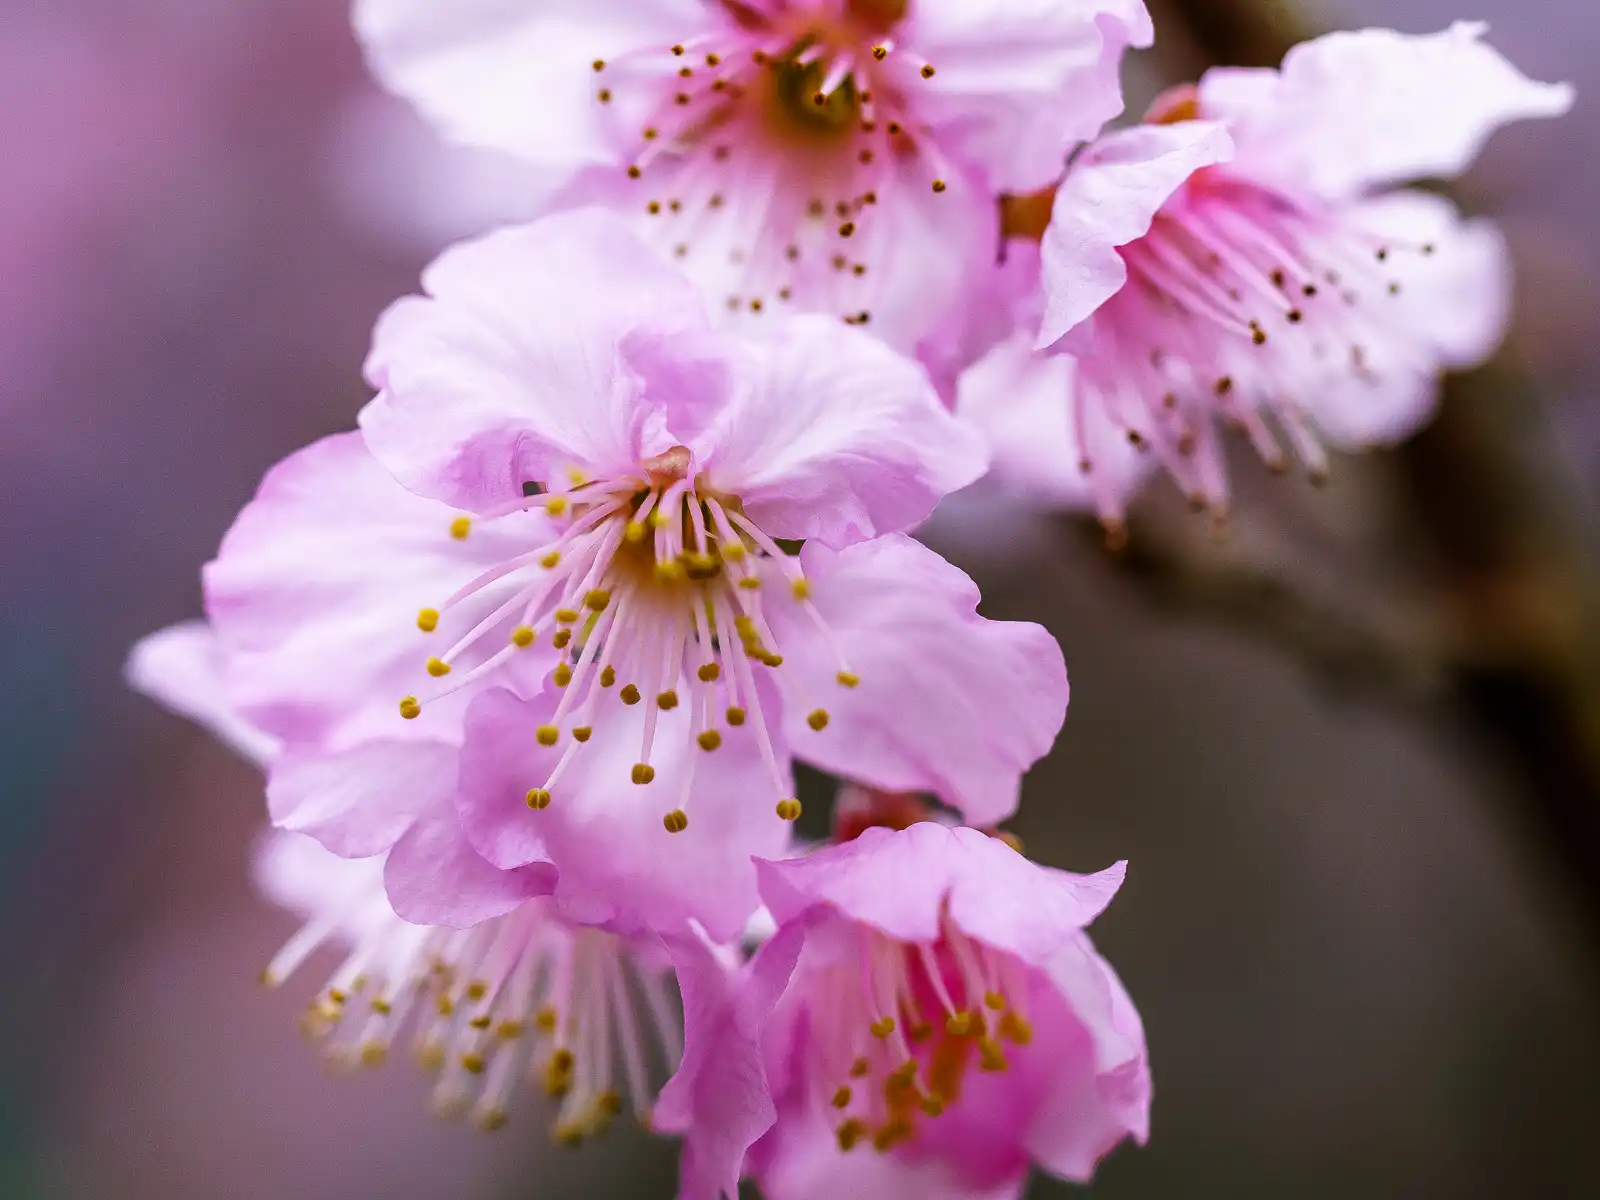 A close-up shot of pink cherry blossoms.